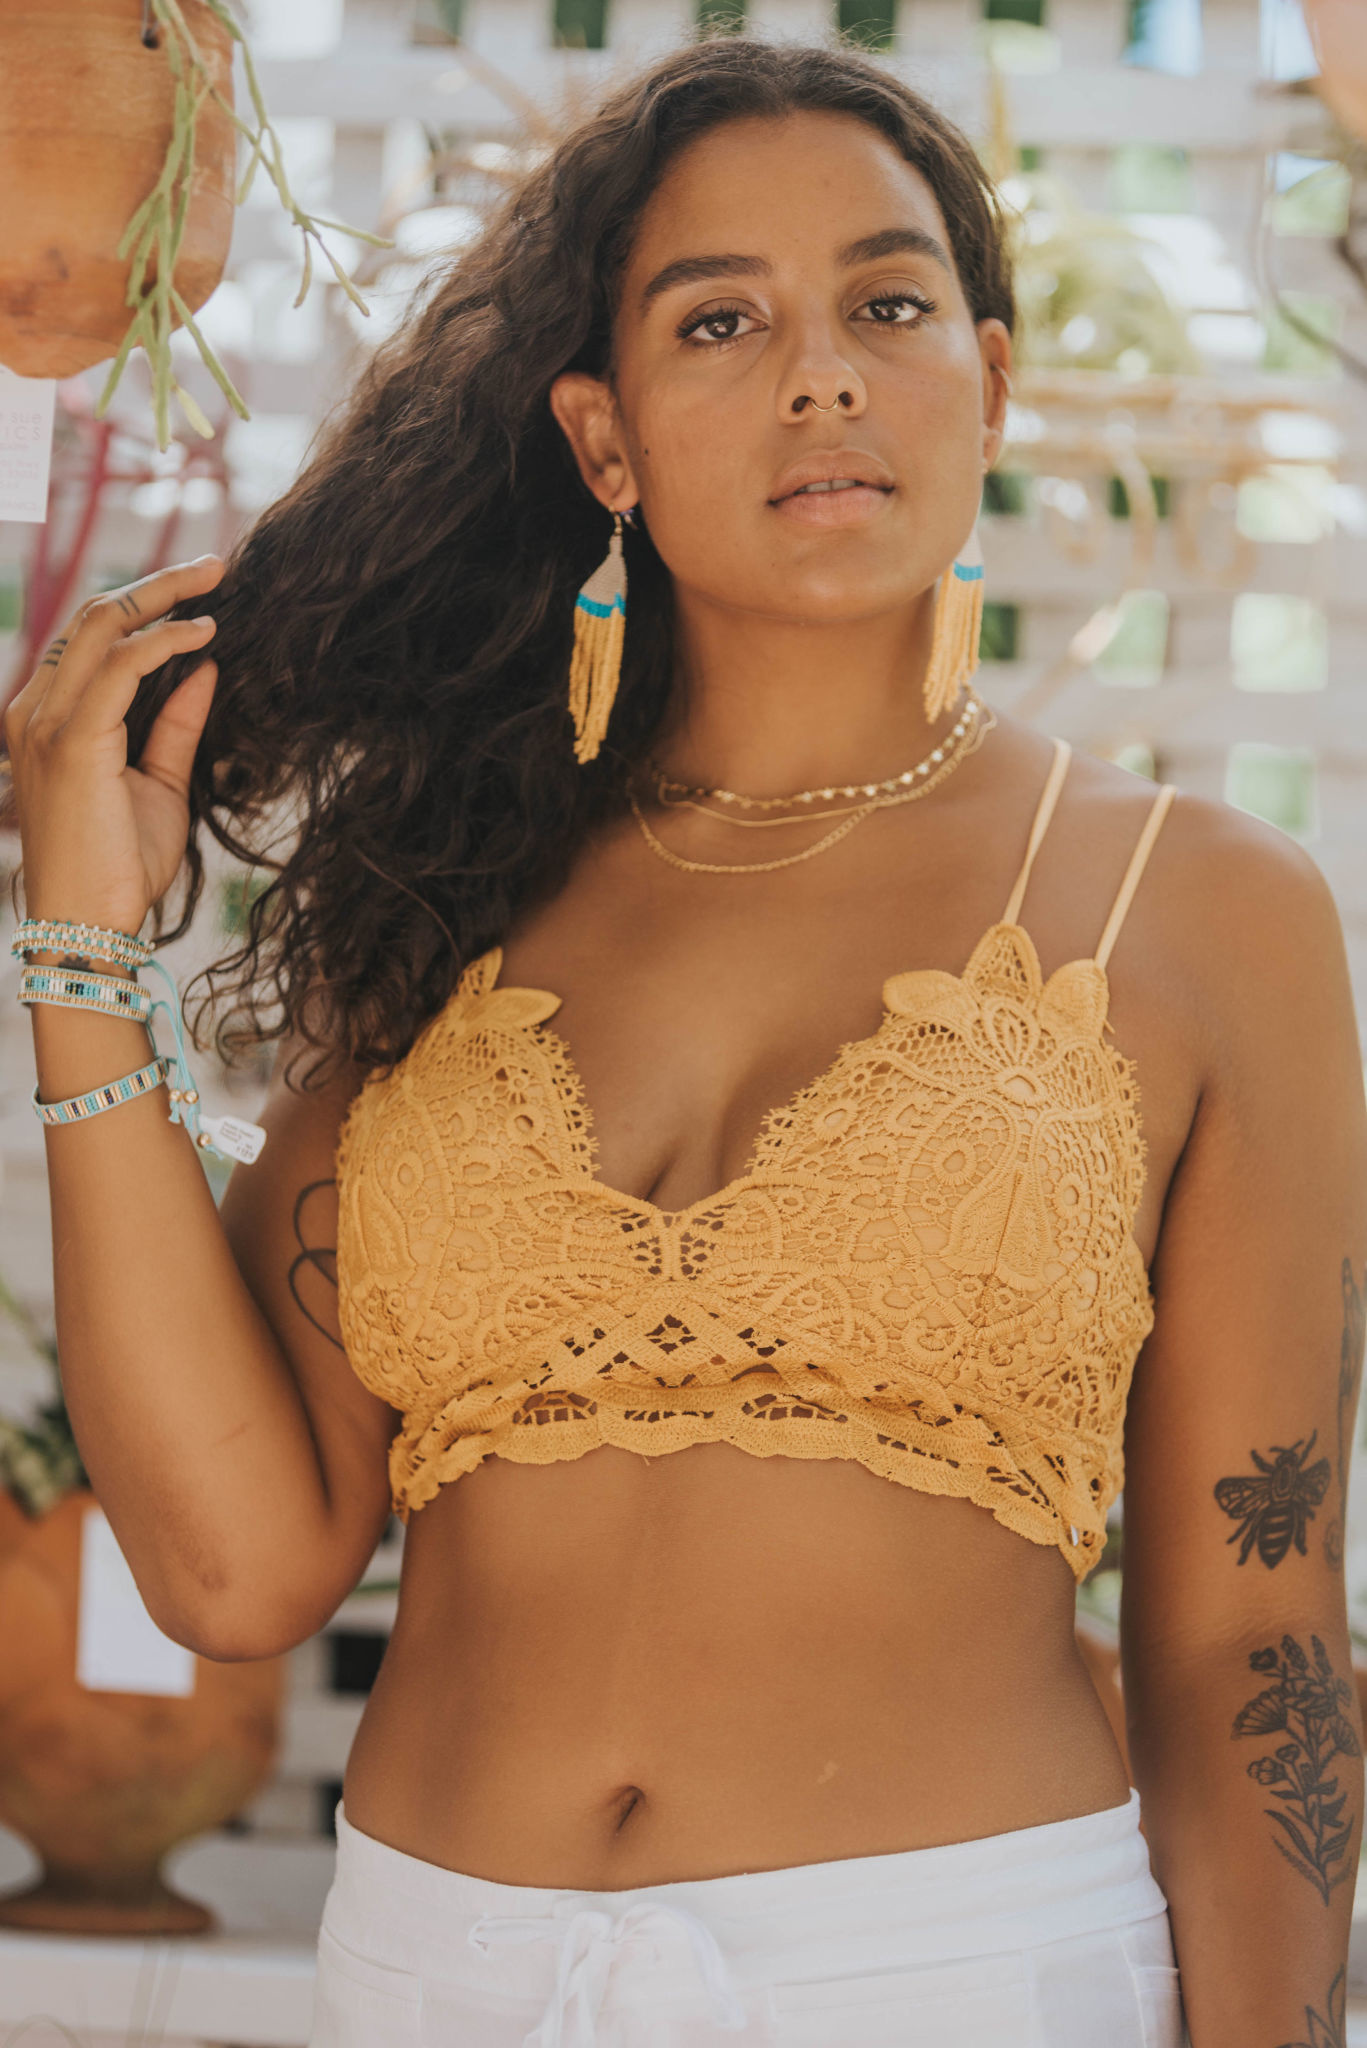 Strappy Lace Padded Bralette / Crop Top by Wishlist- Golden - Miss